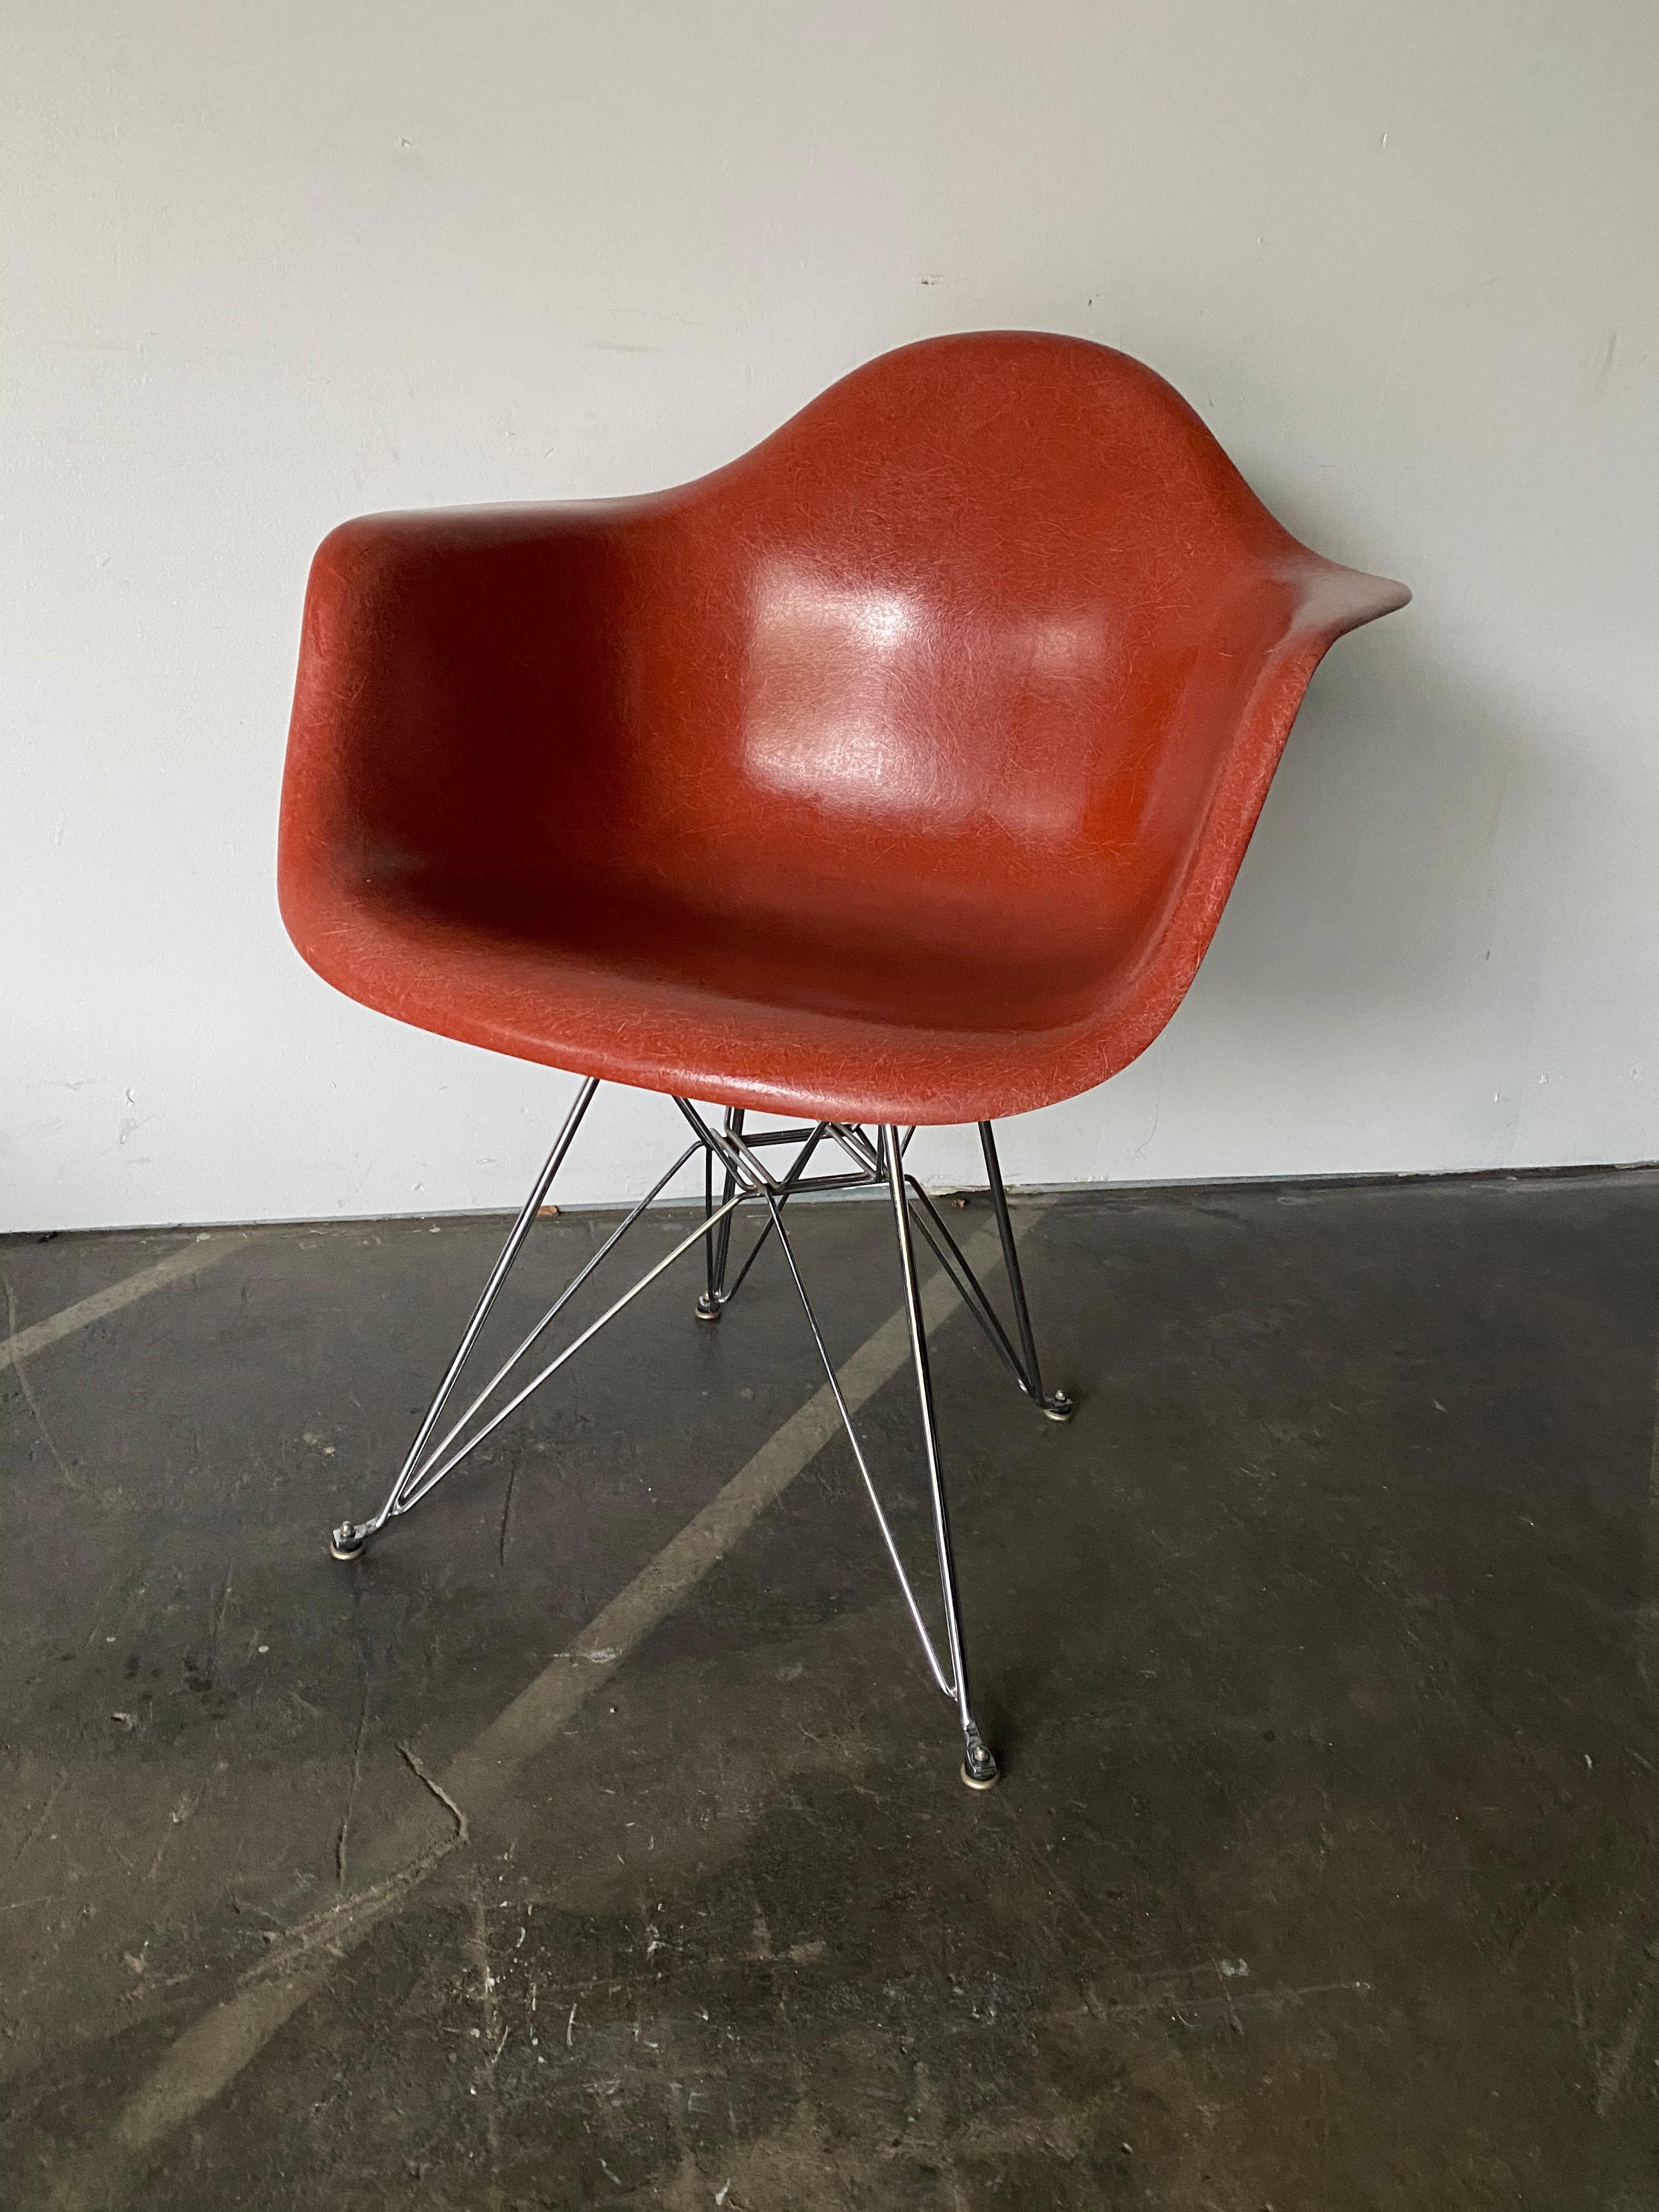 Gorgeous and rare hue of terracotta on this vintage fiberglass Herman Miller Eames armchair. Model DAR with Eiffel base. No cracks. All shock mounts intact. Stamped Herman Miller under chair and guaranteed authentic.